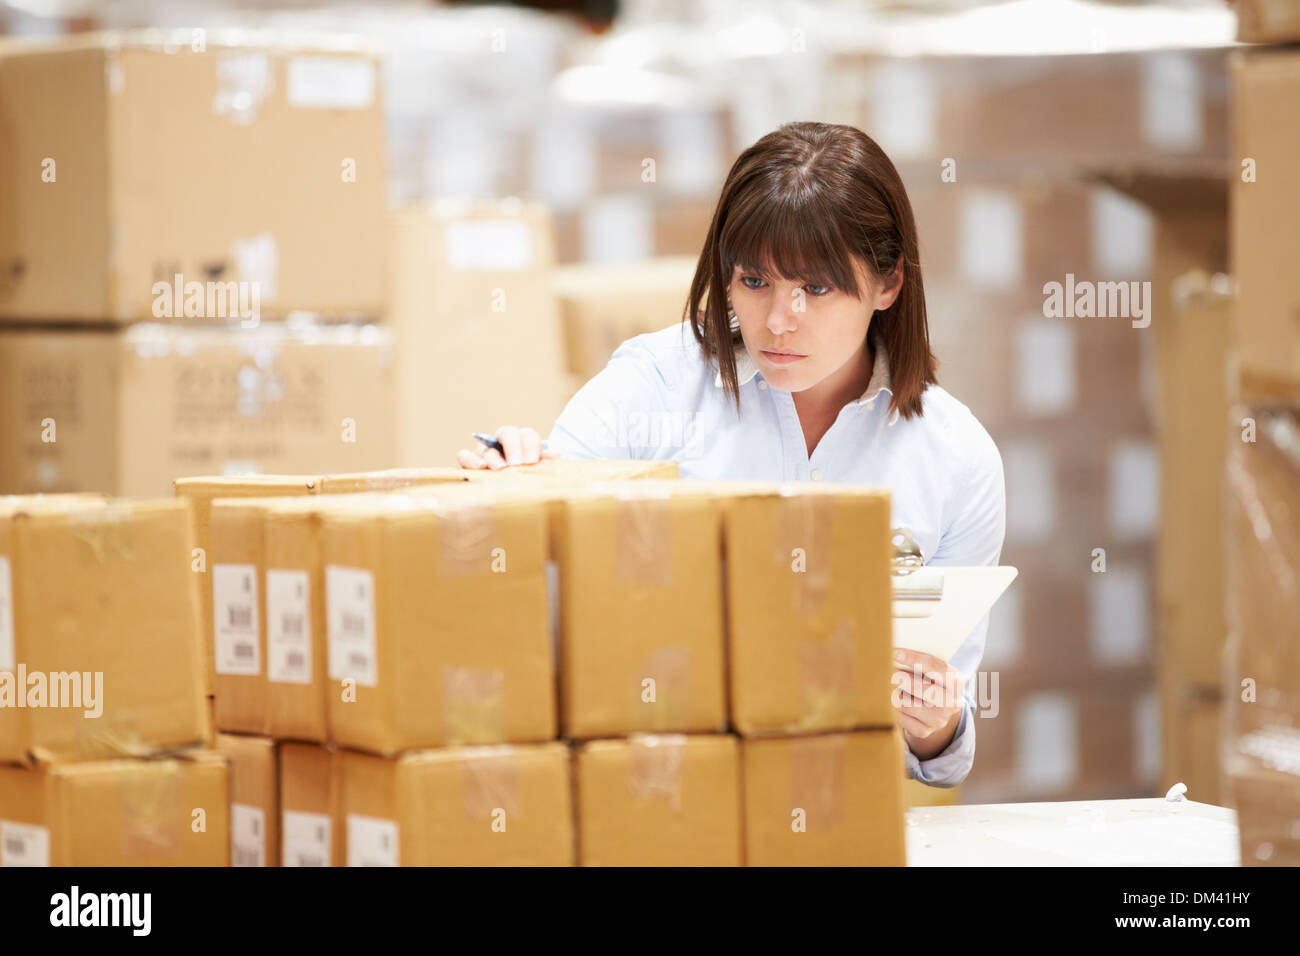 Worker In Warehouse Preparing Goods For Dispatch Stock Photo